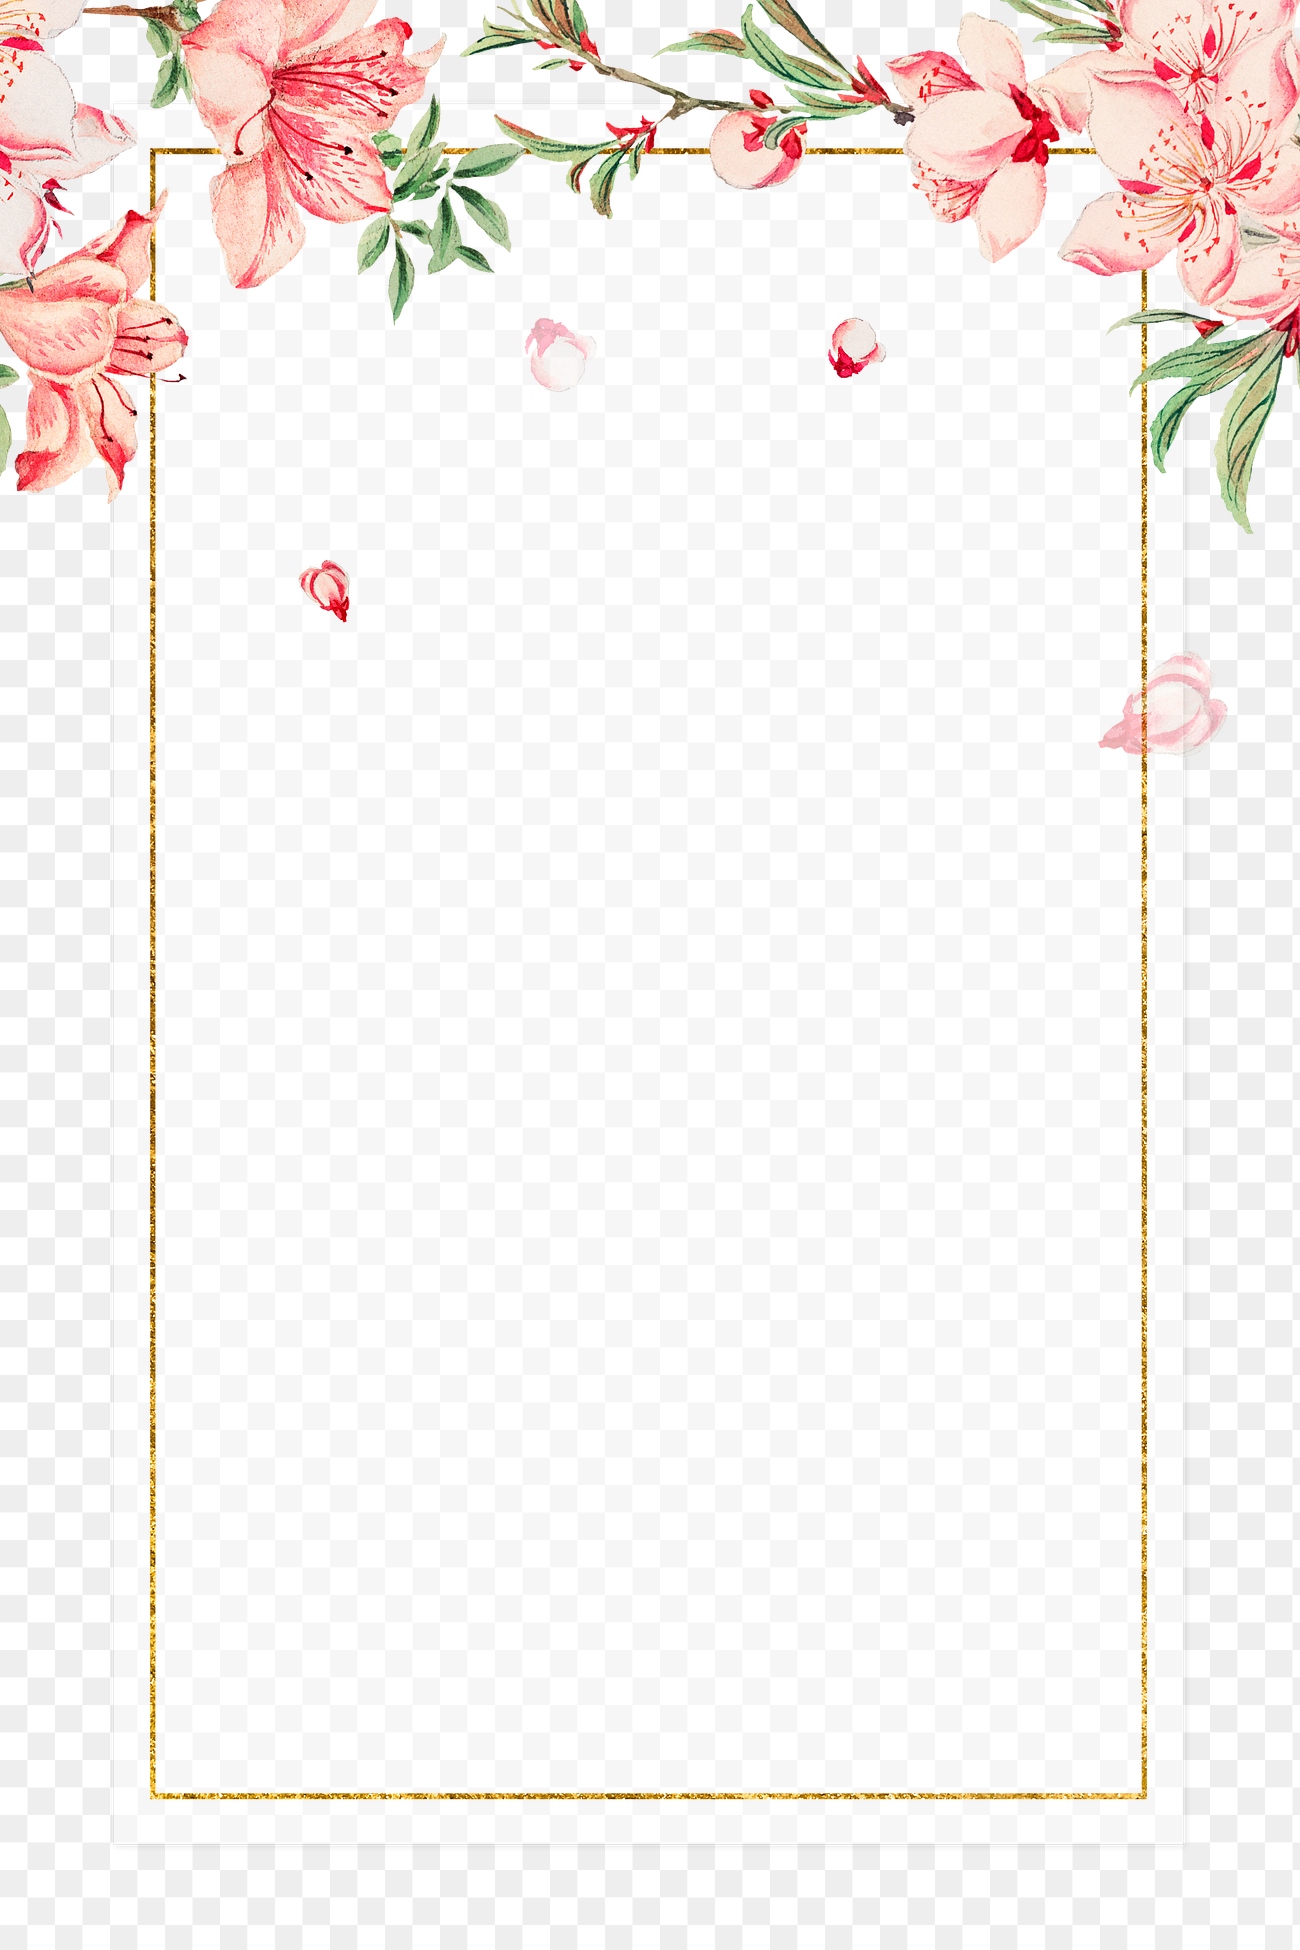 Vintage Japanese frame png peach | Free PNG Sticker - rawpixel